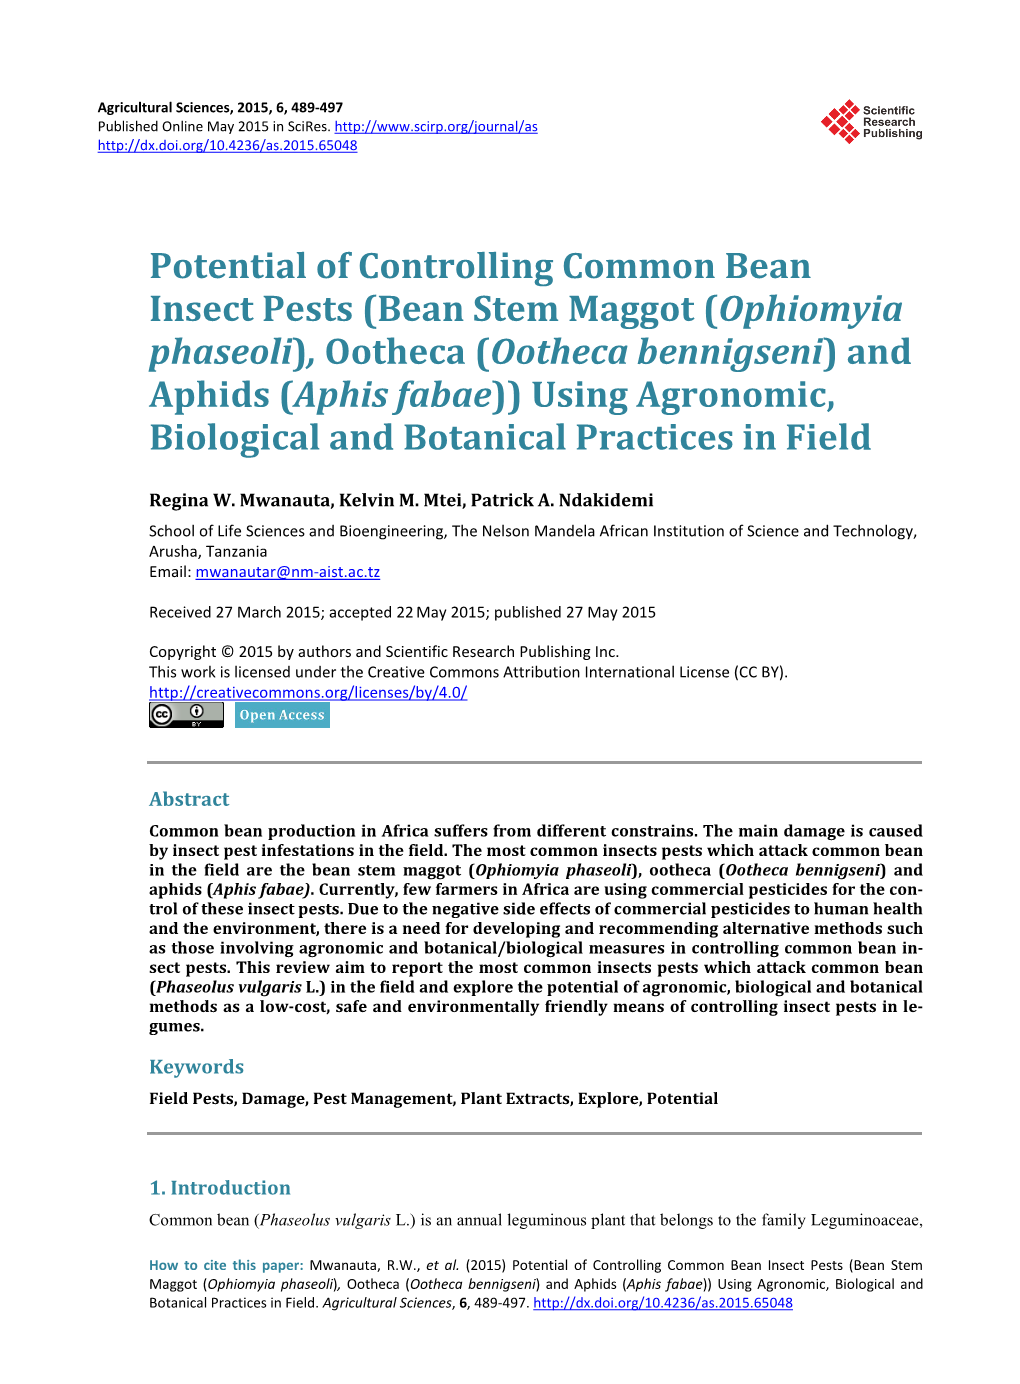 Potential of Controlling Common Bean Insect Pests (Bean Stem Maggot (Ophiomyia Phaseoli), Ootheca (Ootheca Bennigseni) and Aphid